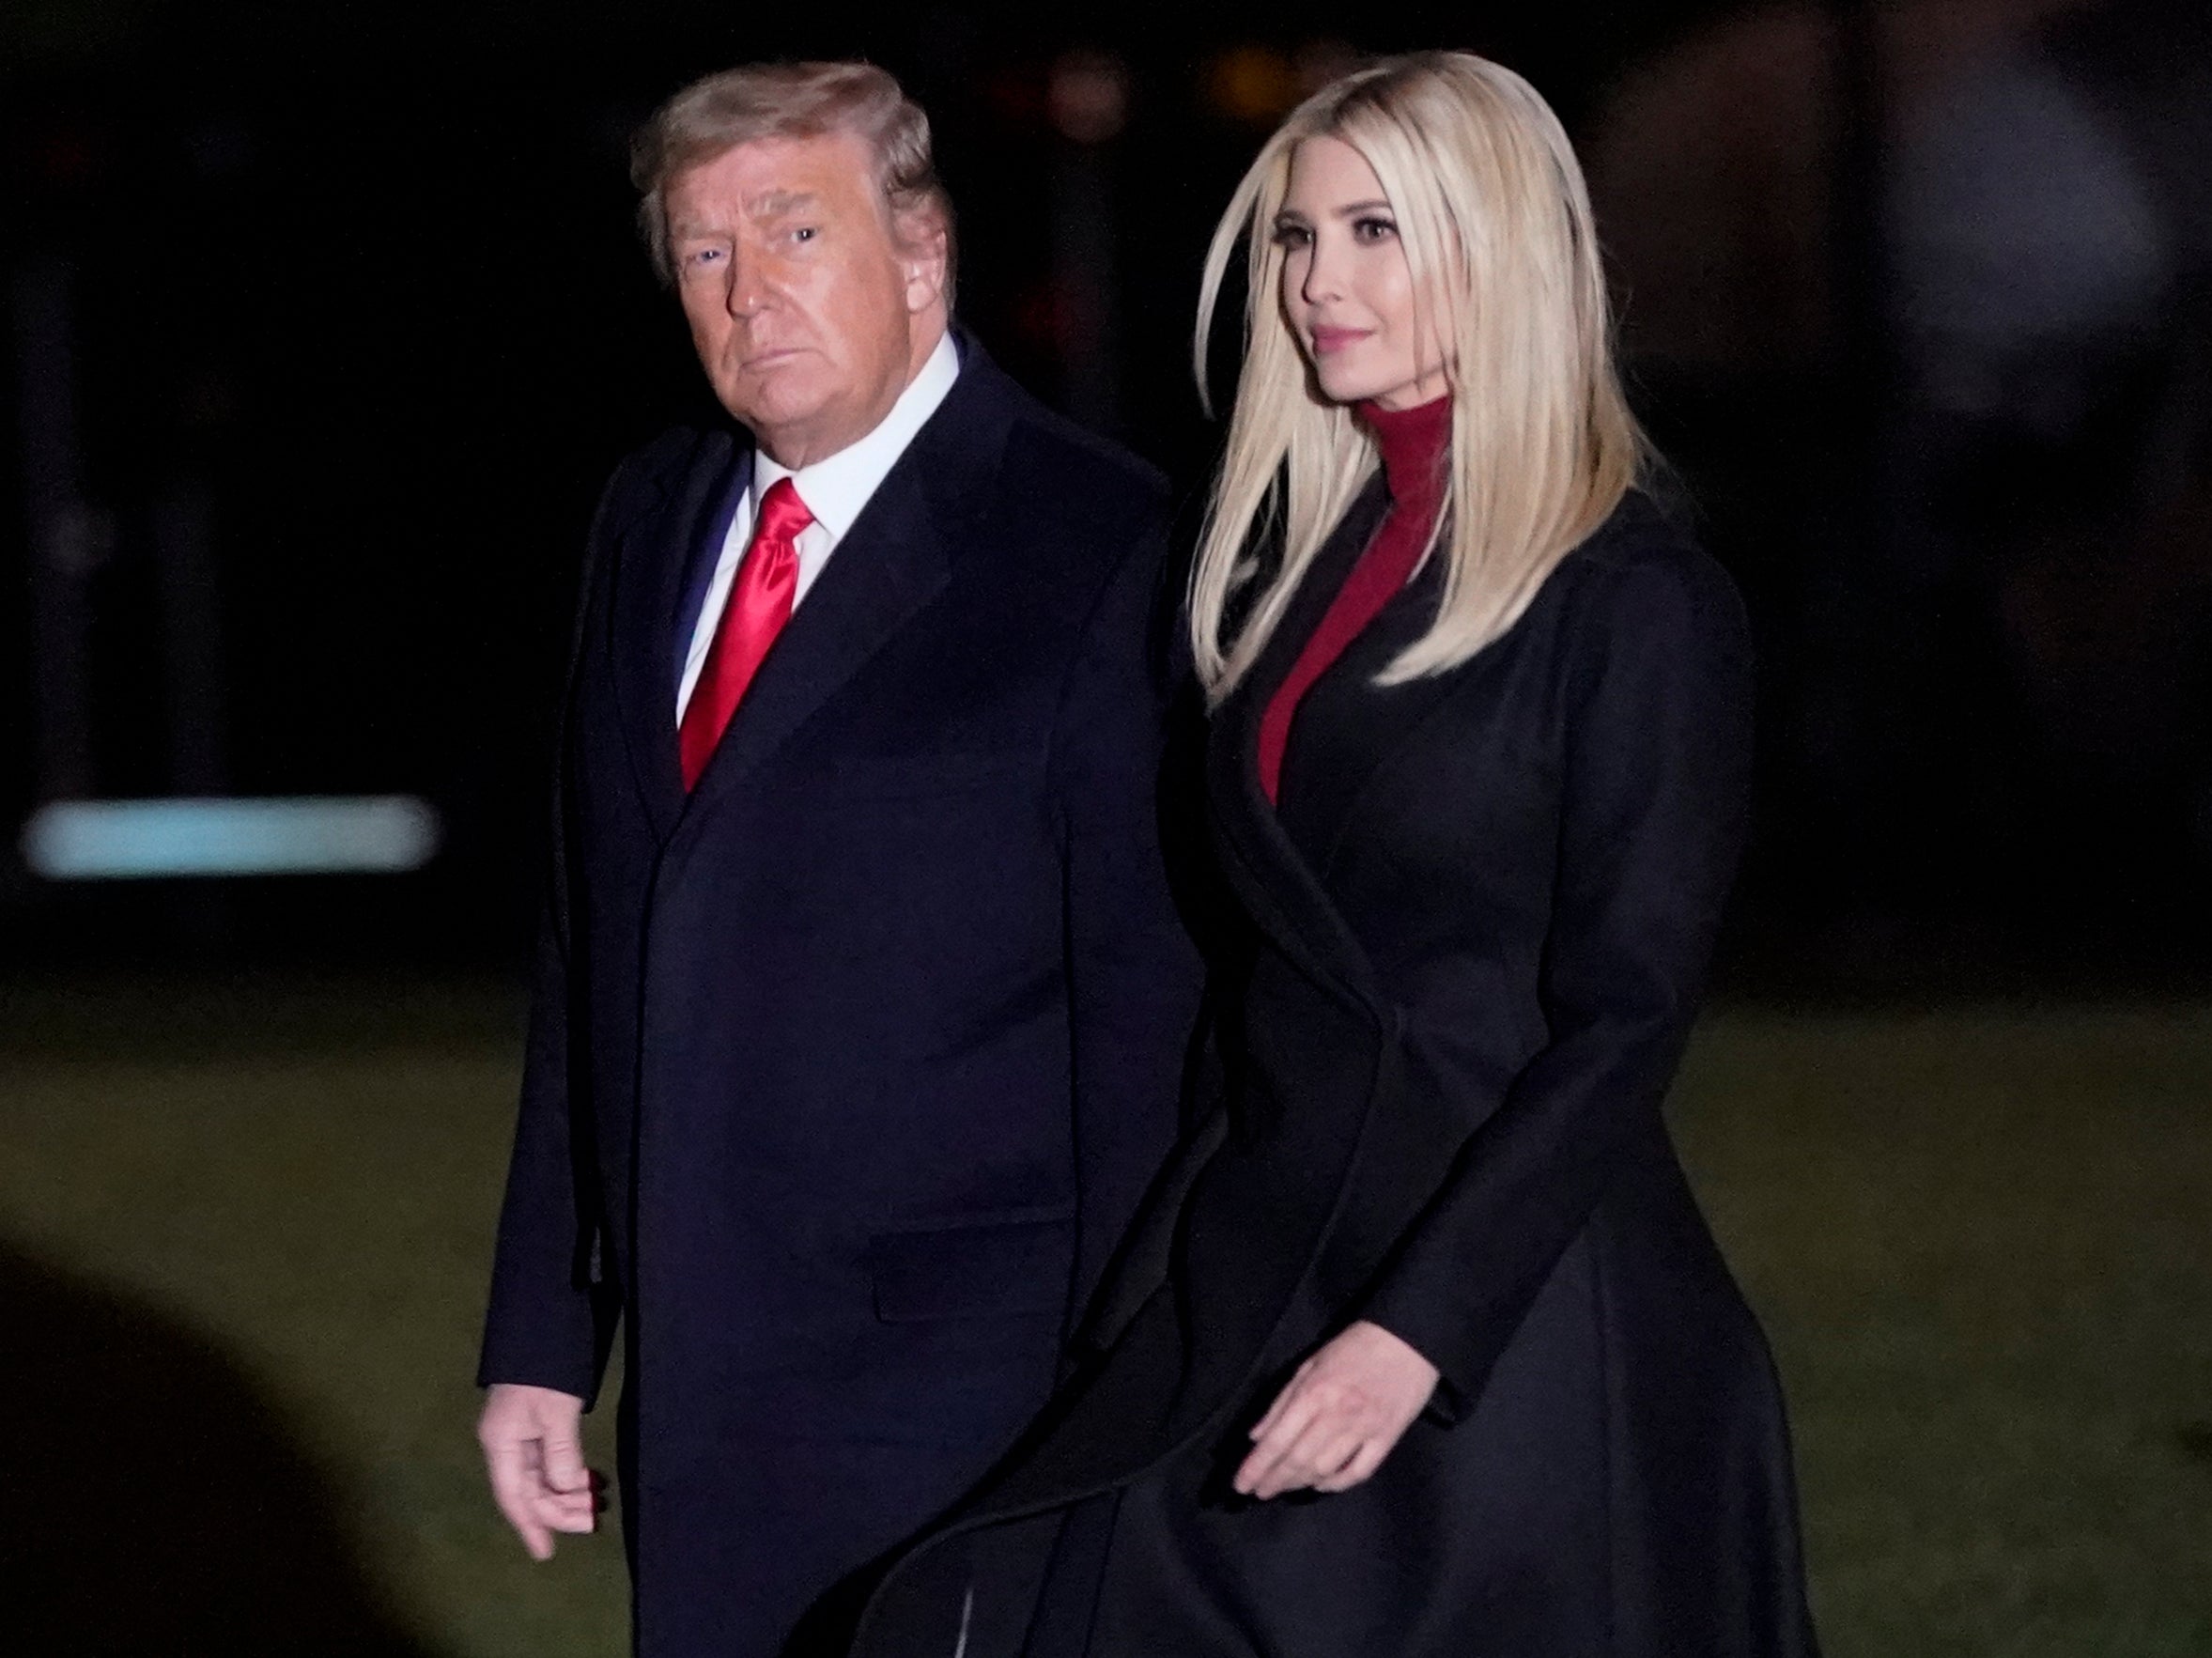 Donald Trump and daughter Ivanka Trump walk to Marine One on the South Lawn of the White House on 4 January 2020 in Washington, DC